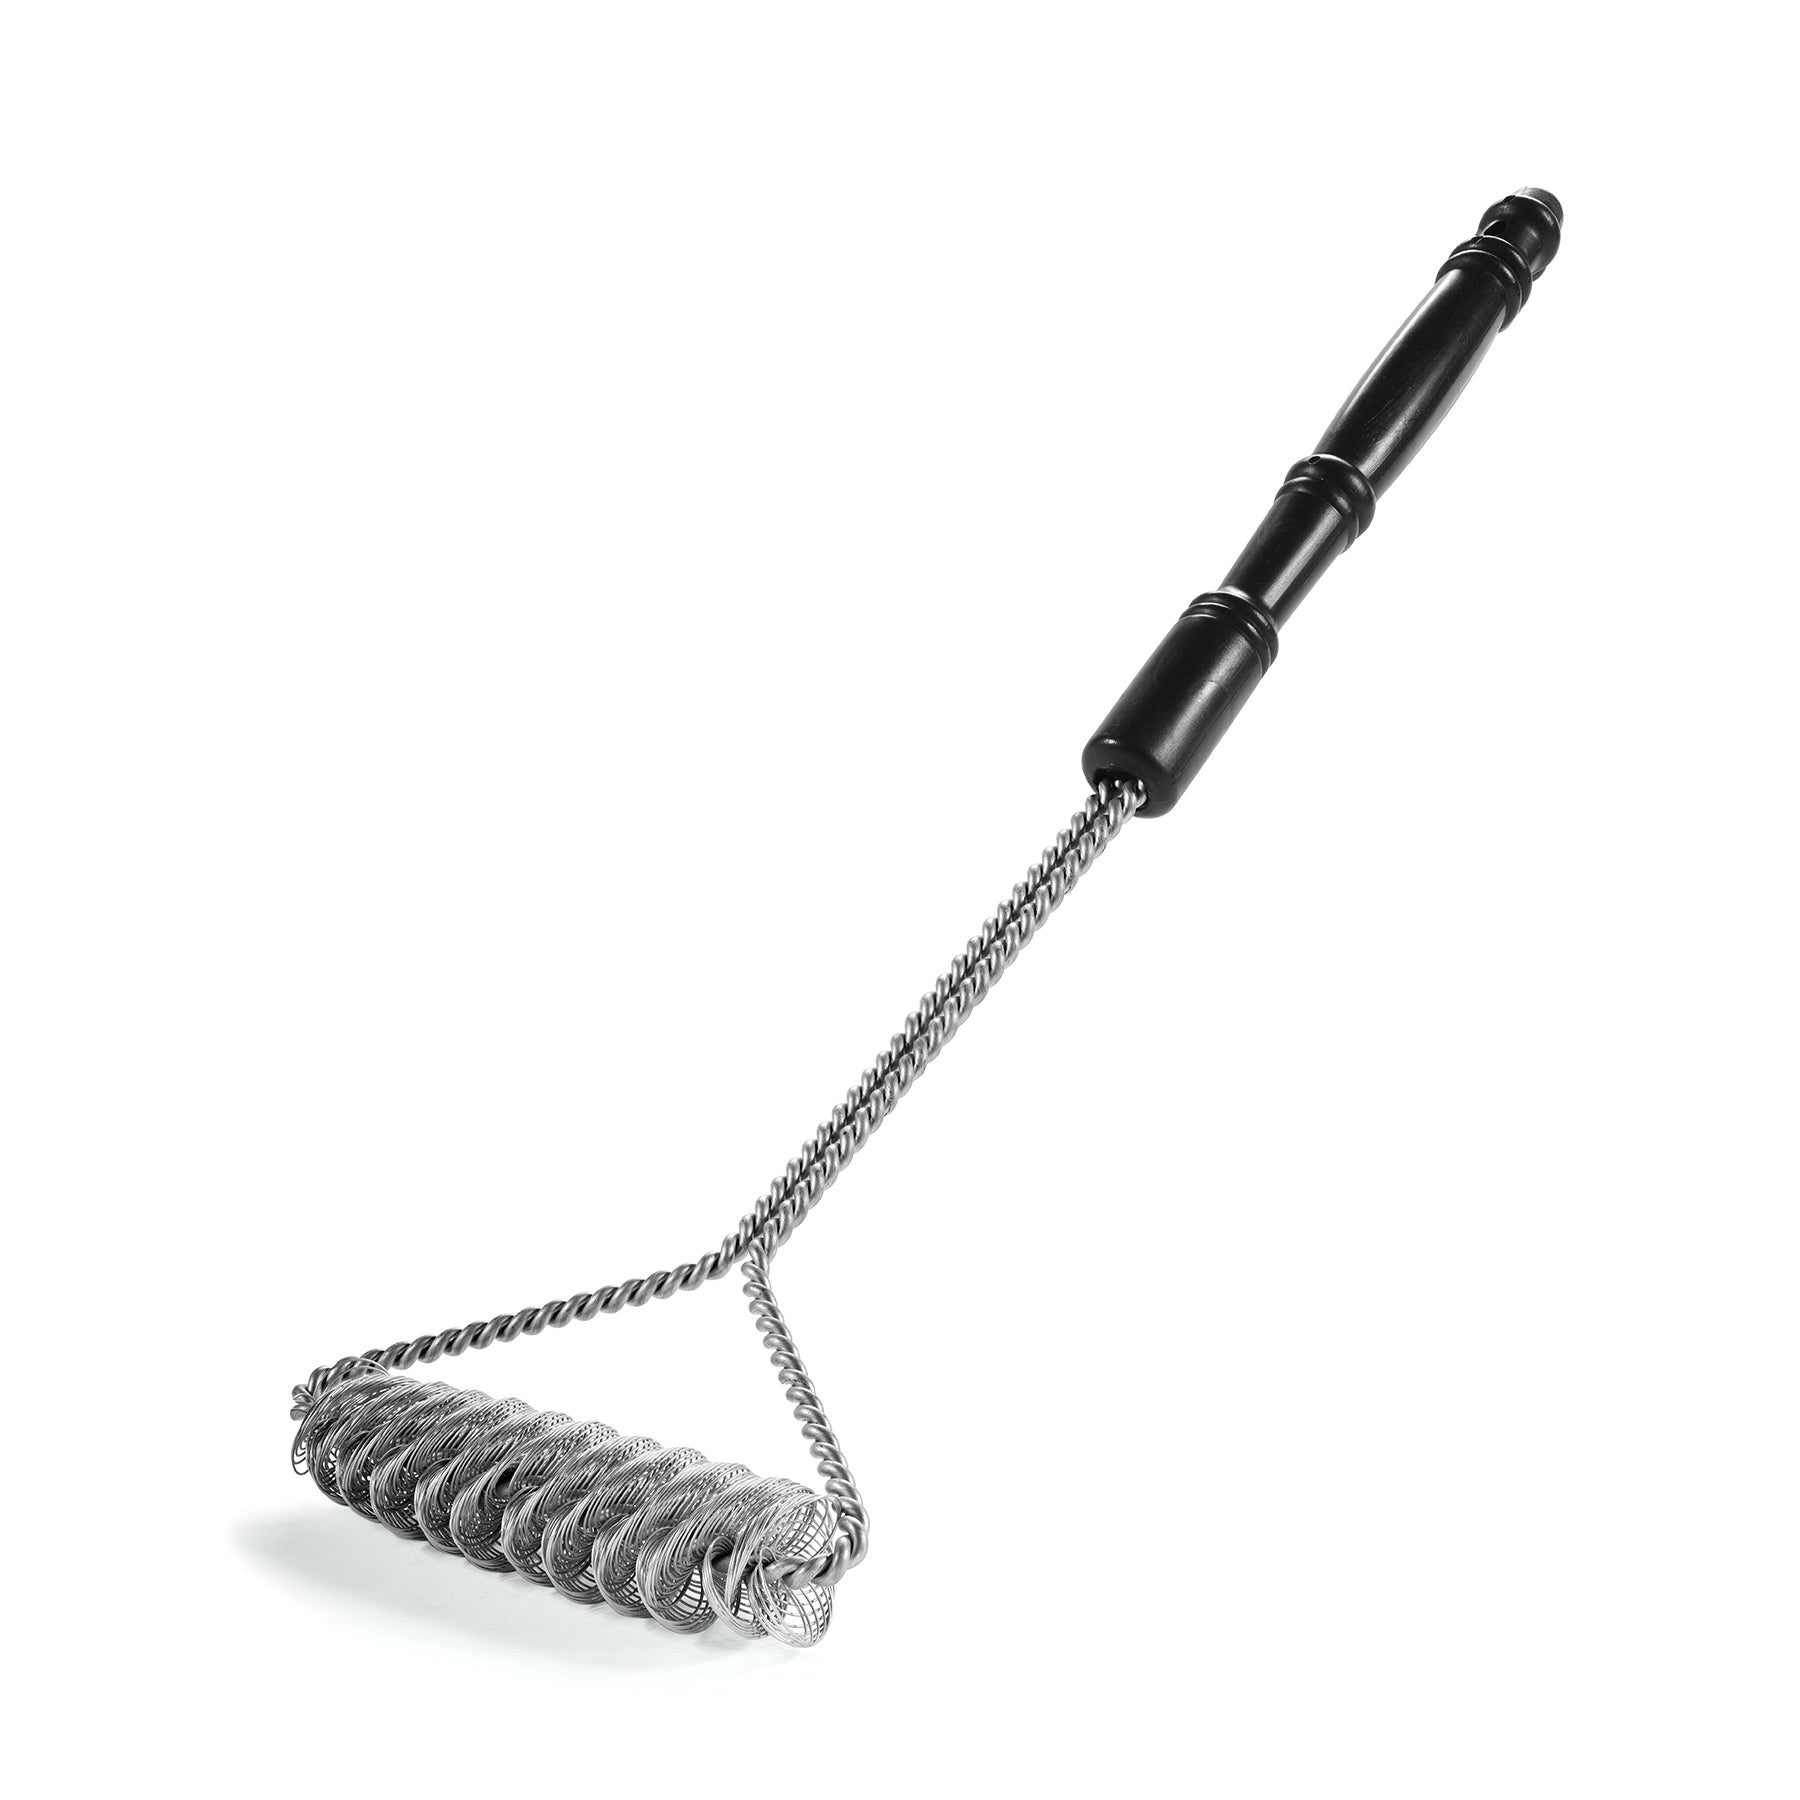 BBQ Grill Cleaning Brush Bristle Free & Scraper Triple Helix Design  Barbecue Cleaner Non-Bristle Grill Brush Safe for Gas Charcoal Porcelain  Grills